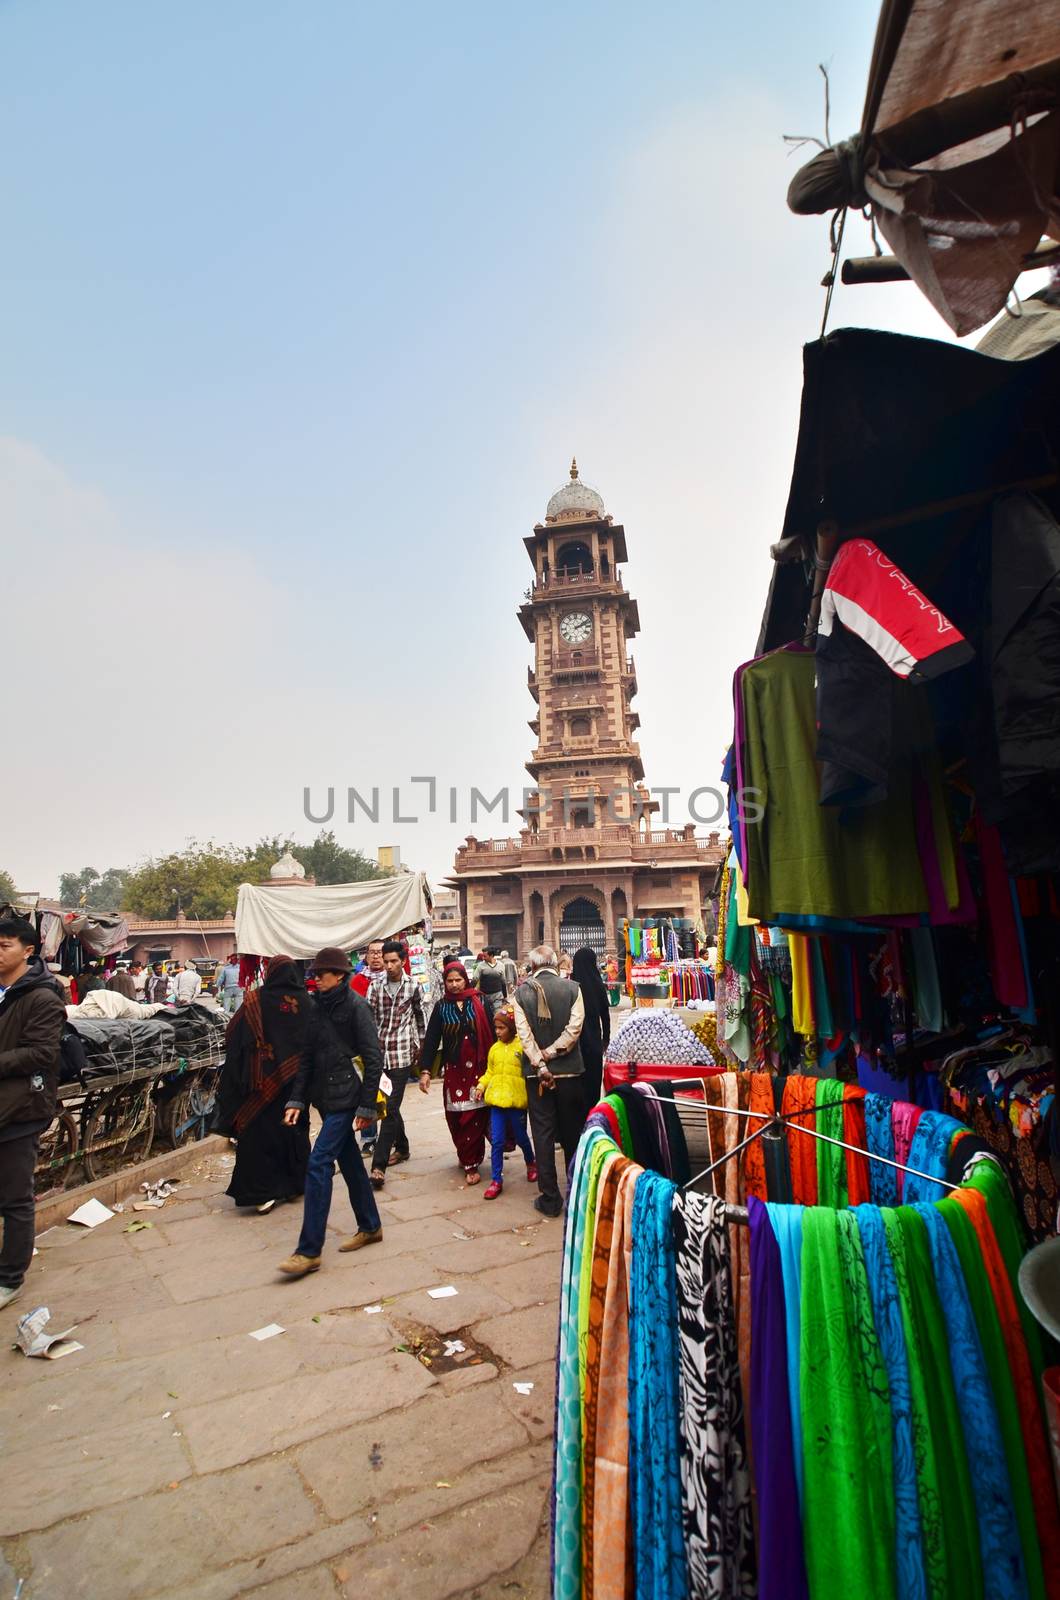 Jodphur, India - January 1, 2015: Unidentified people shopping at market under the clock tower in Jodhpur by siraanamwong